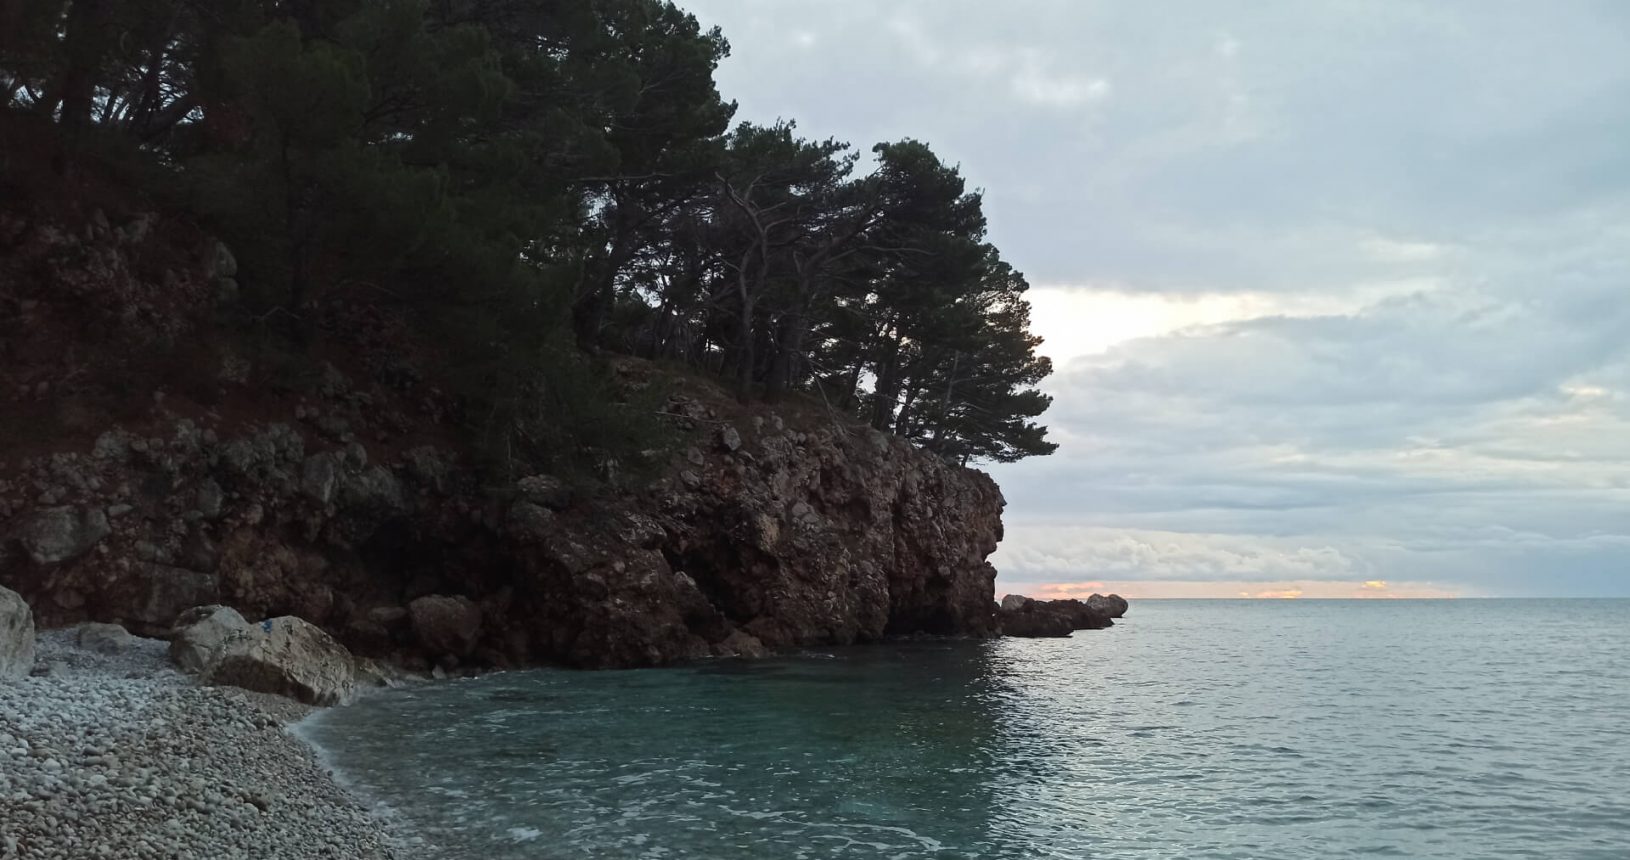 lFKK Sutomore Beach surrounded by rocks and trees